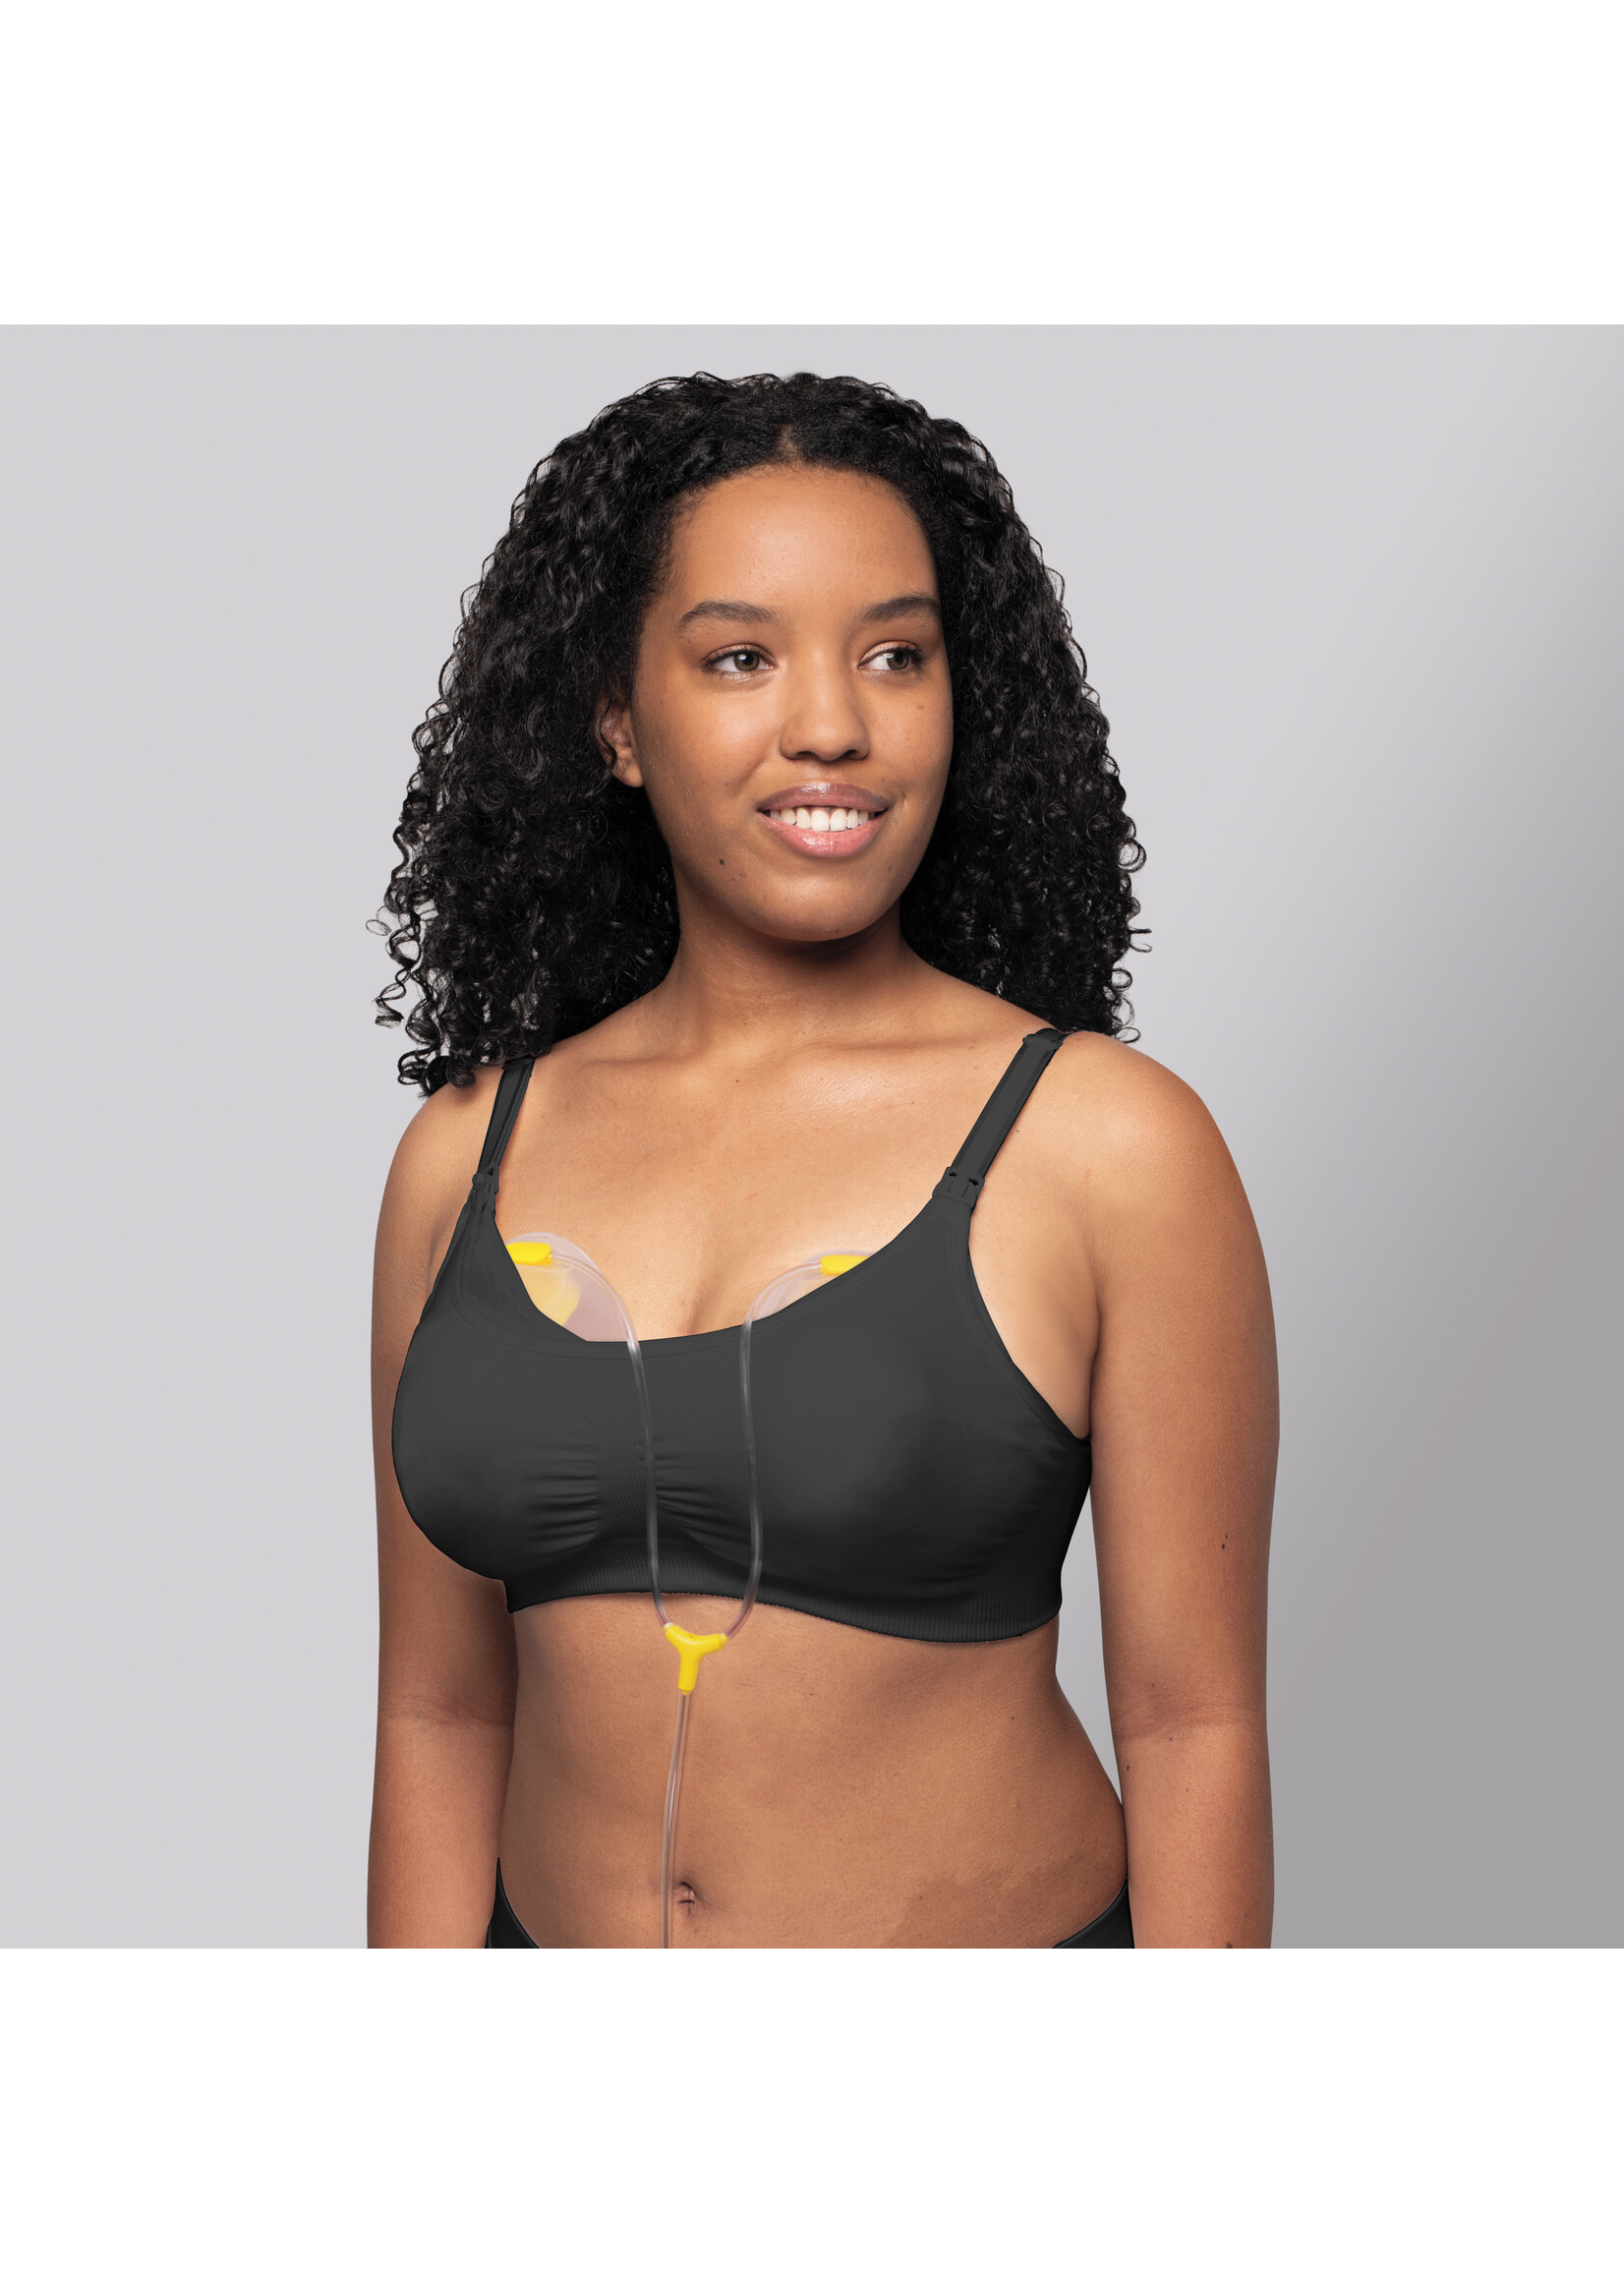 Medela 3 in 1 Nursing and Pumping Bra | Breathable, Lightweight for  Ultimate Comfort when Feeding, Electric Pumping or In-Bra Pumping, Black  Small